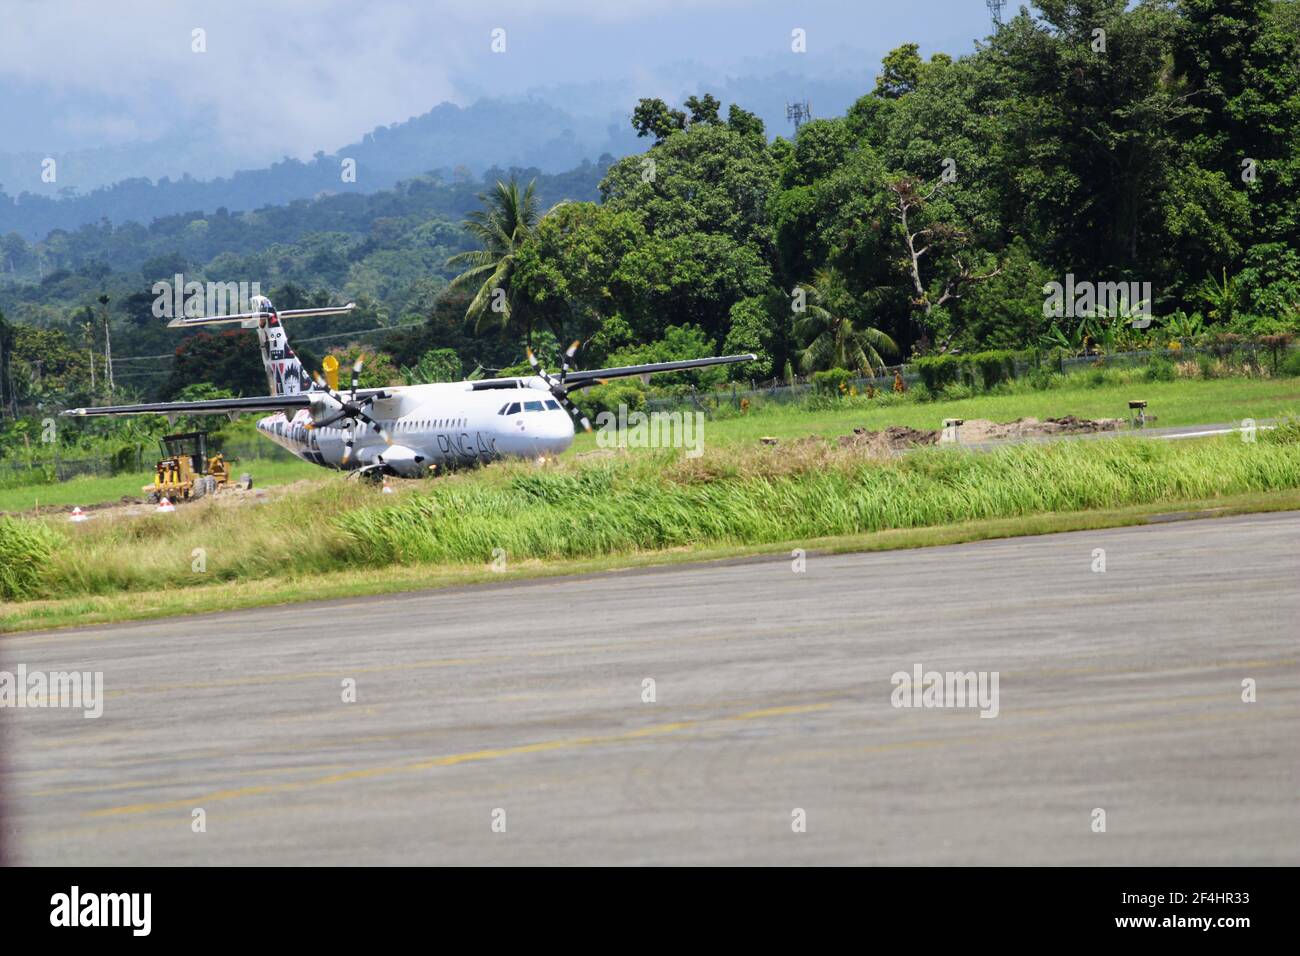 PNG Air's ATR 72 on the runway at Madang airport, Papua New Guinea. Stock Photo